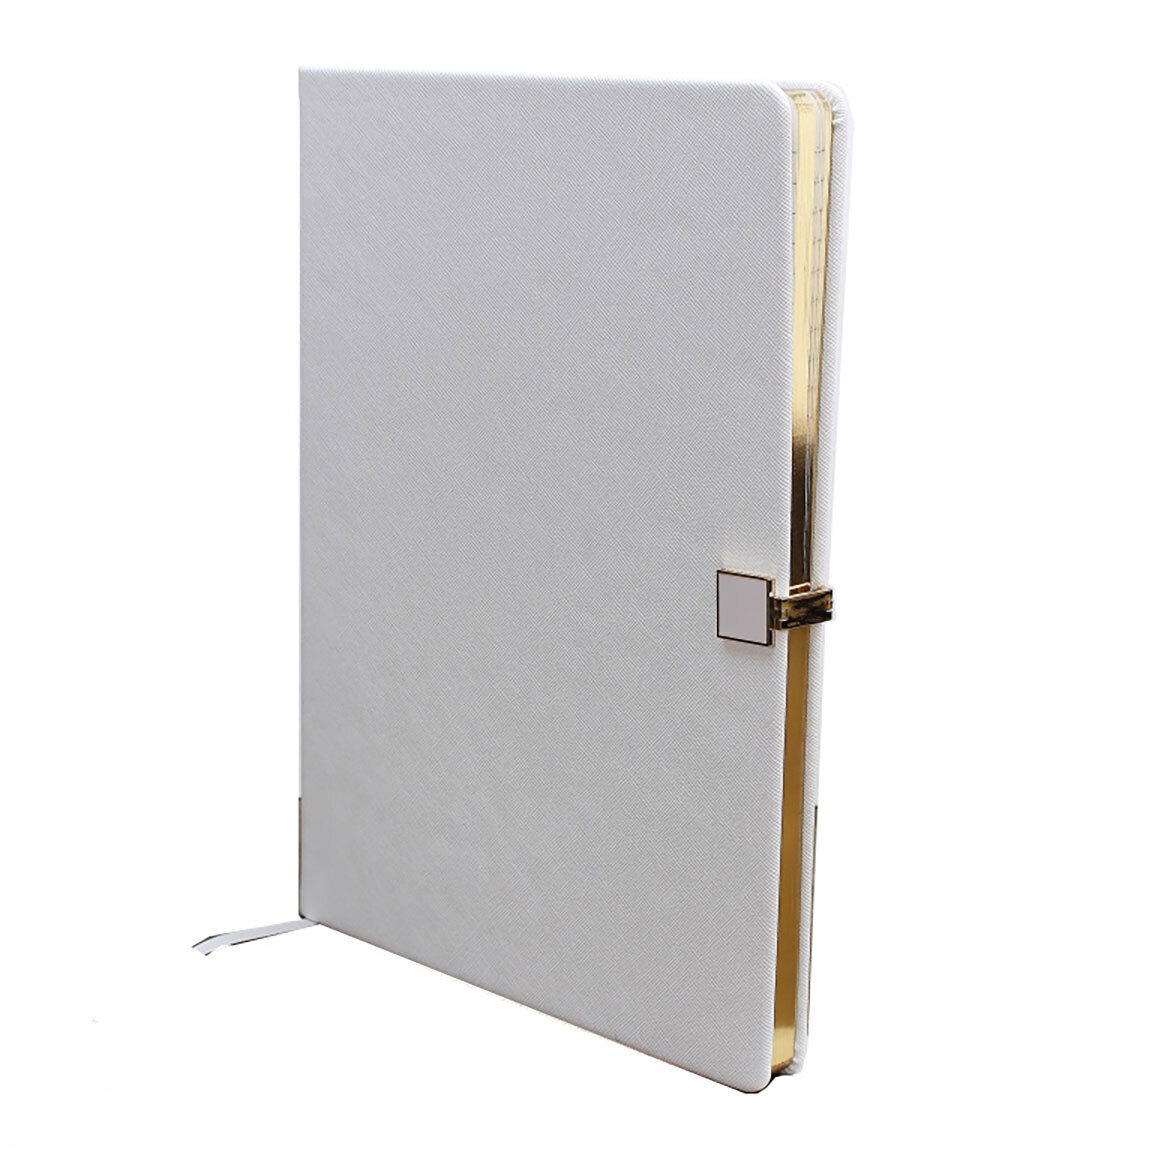 Addison Ross White & Gold A4 Notebook A4 Inch Pu Leather NB1155